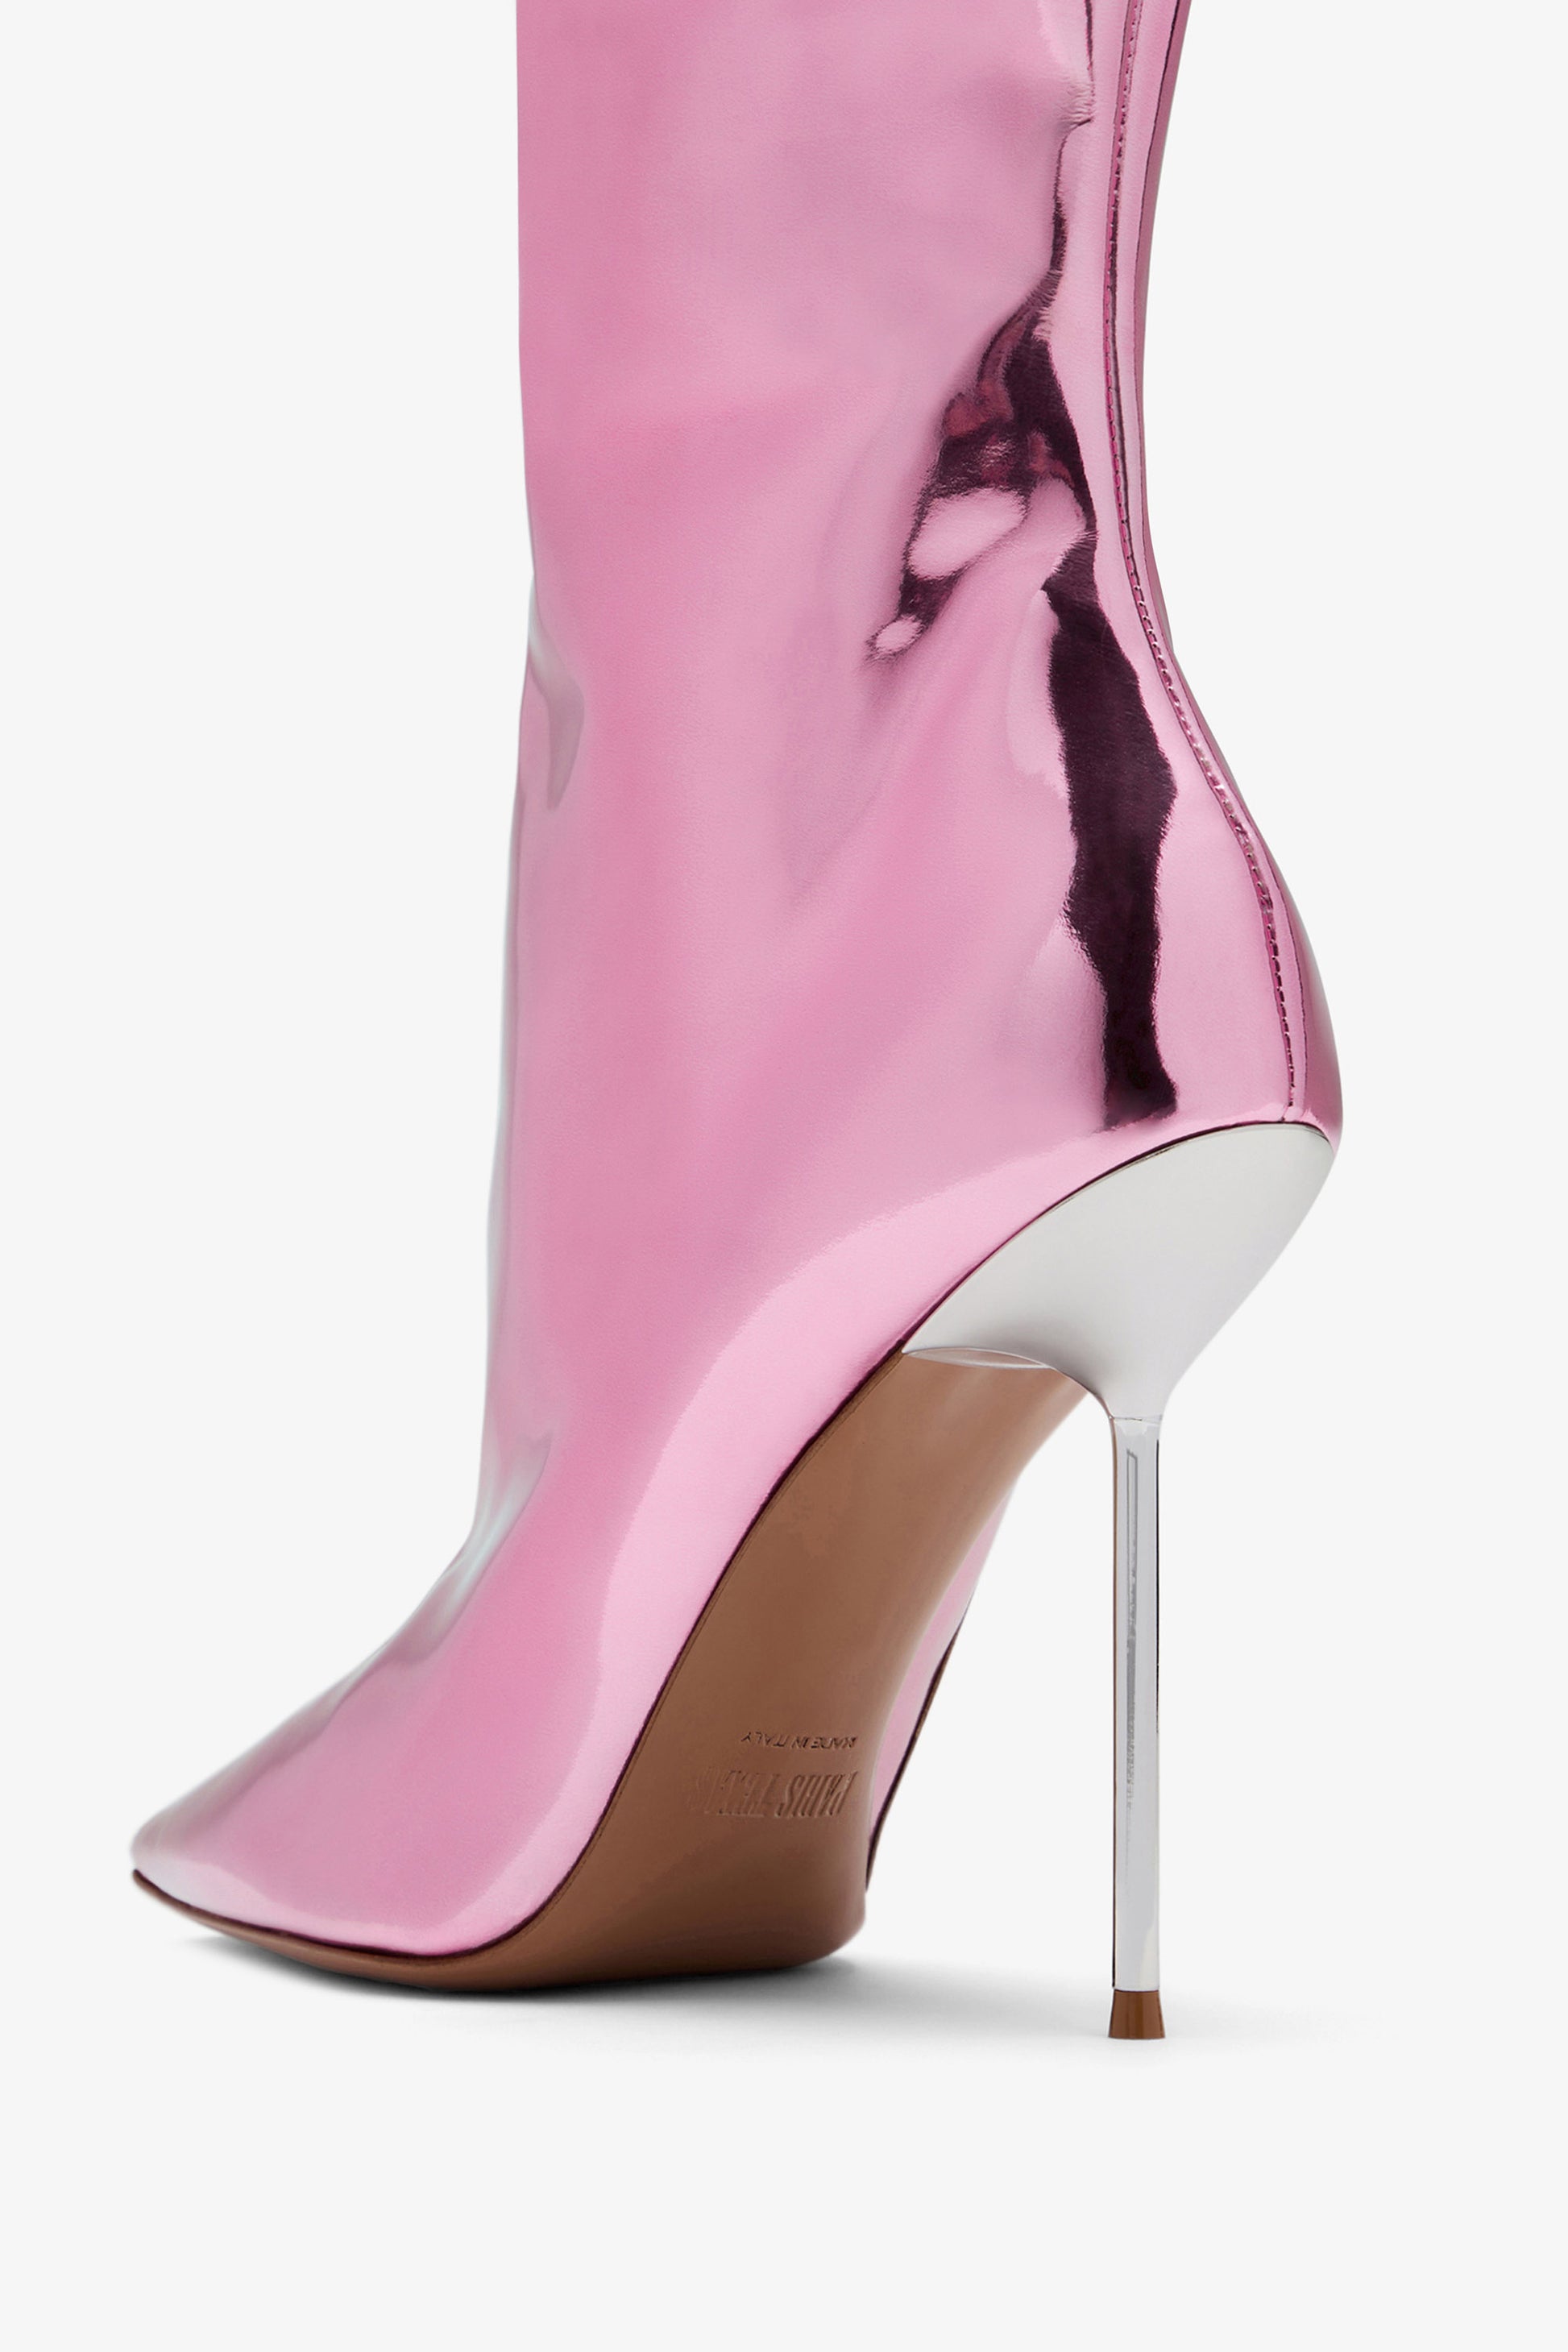 Pink mirrored leather boot